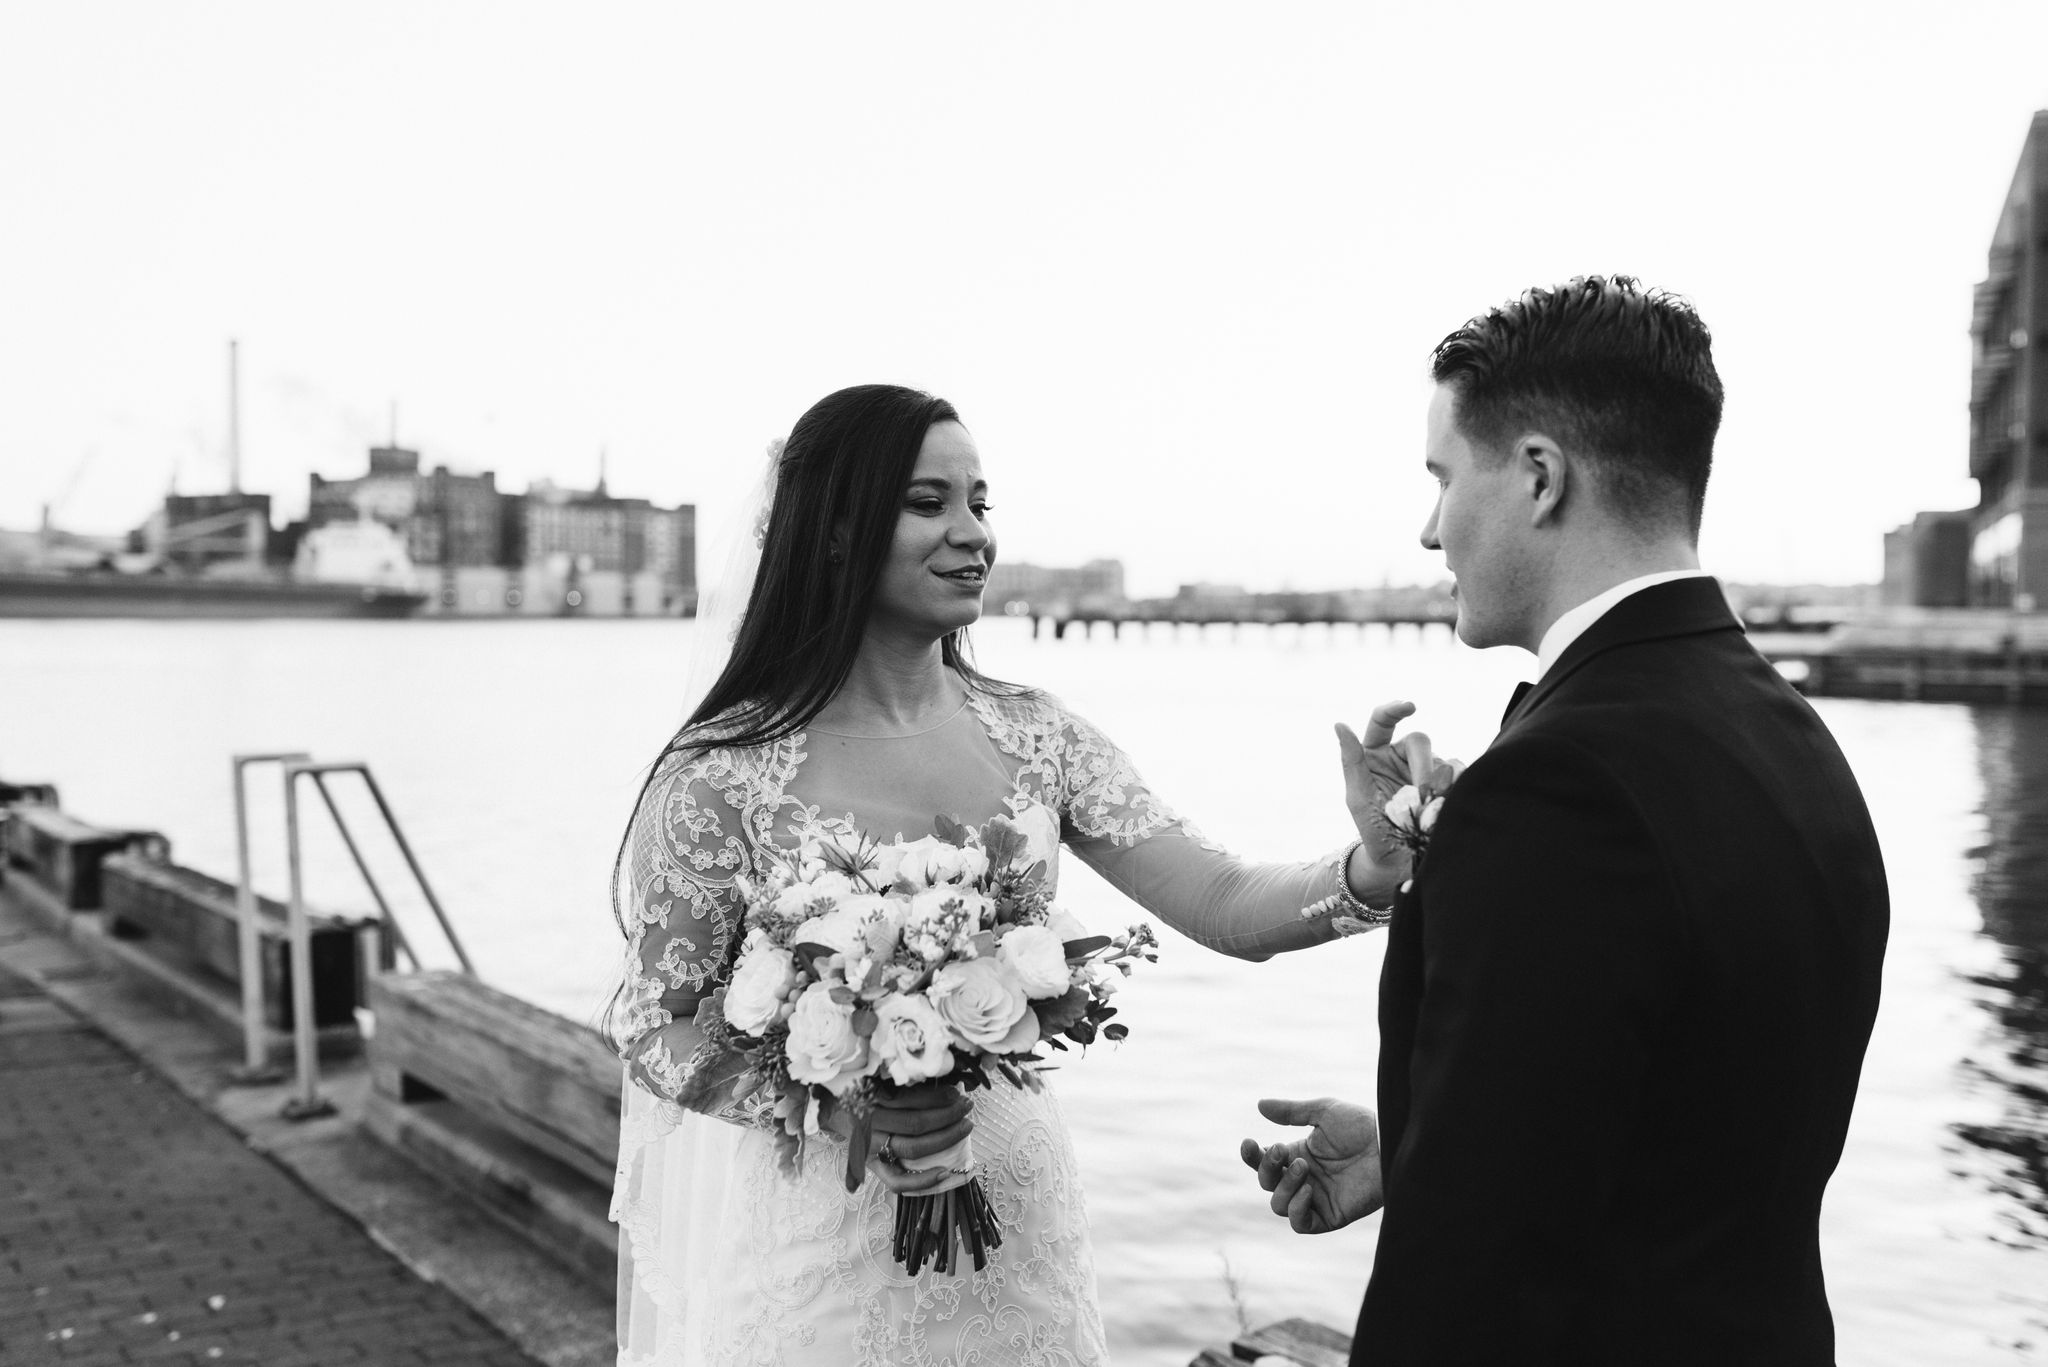  Baltimore, Fells Point, Maryland Wedding Photographer, Winter Wedding, Historic, Classic, Vintage, Bride and Groom Standing Together at Inner Harbor, Black and White Photo 